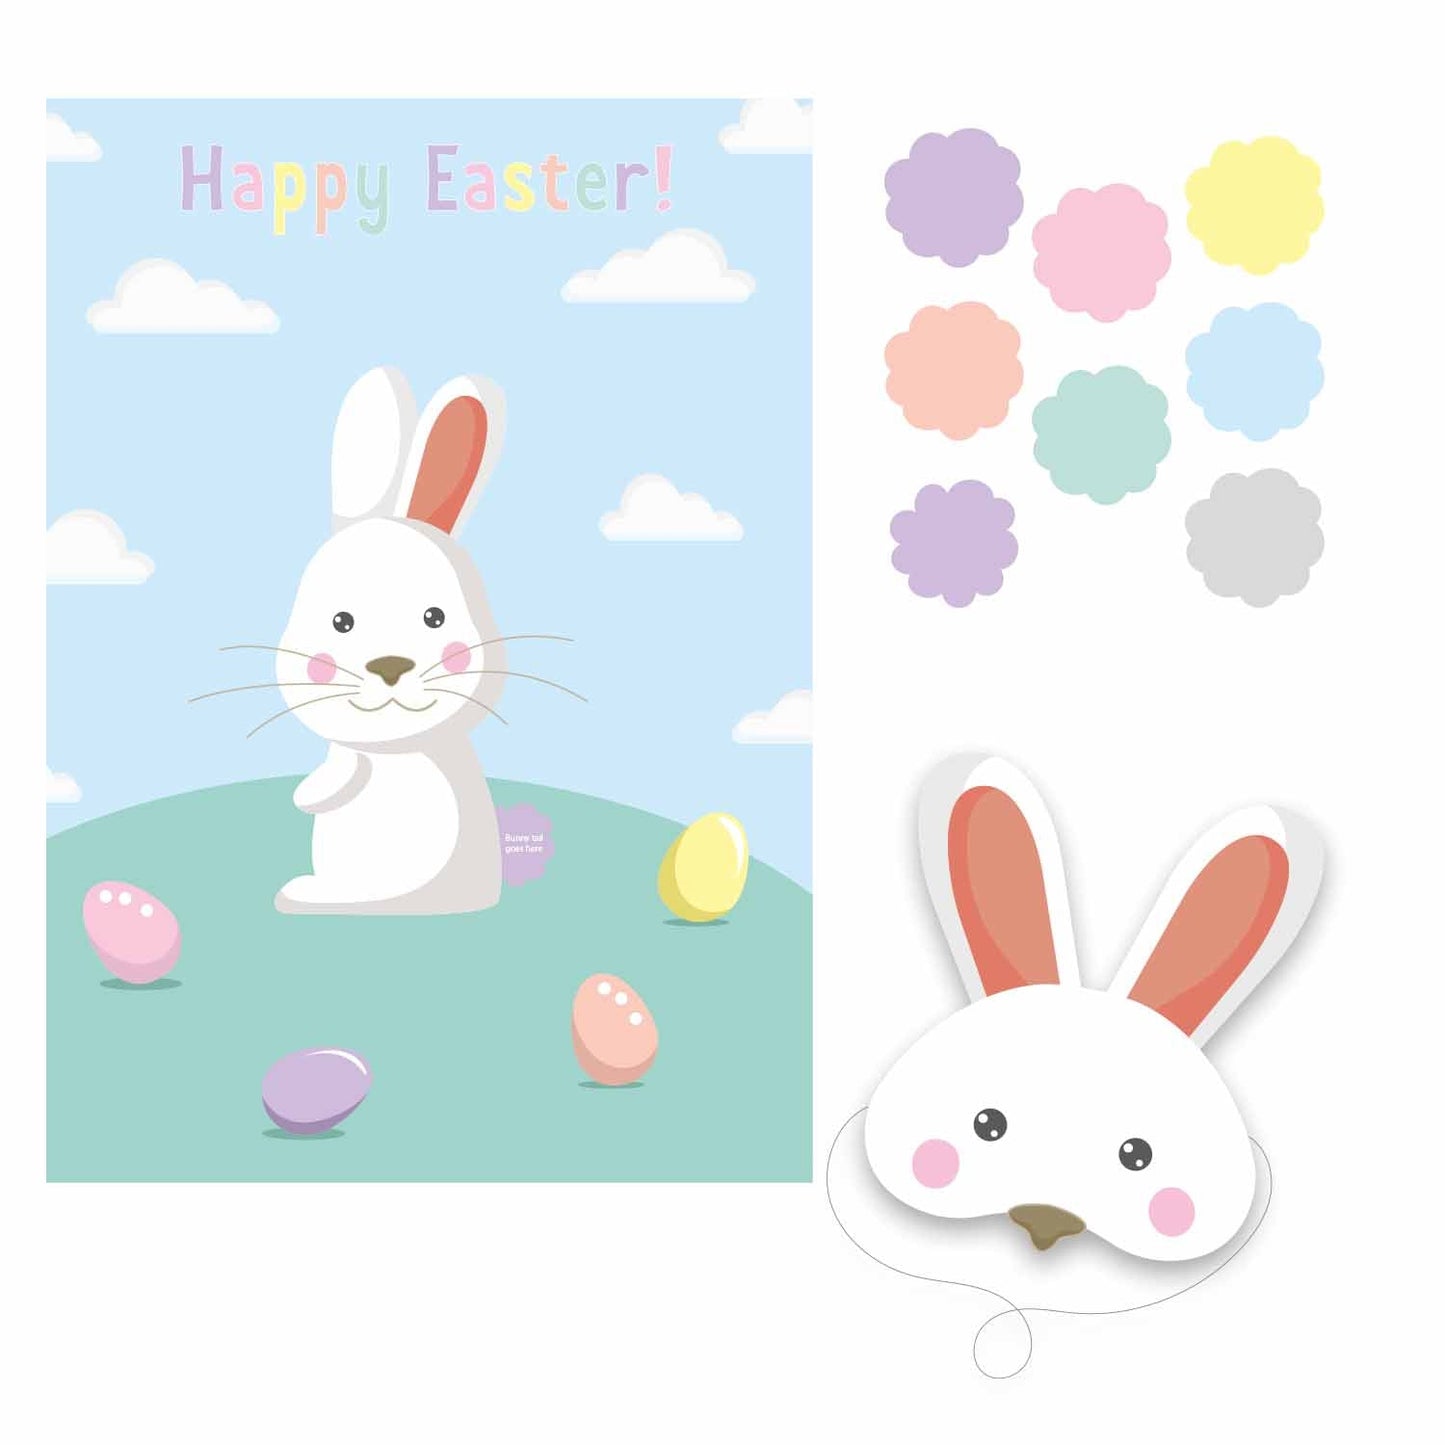 Pin the Tail on the Easter Bunny Game includes cardboard facemask, 8 bunny tail stickers and 1 game board